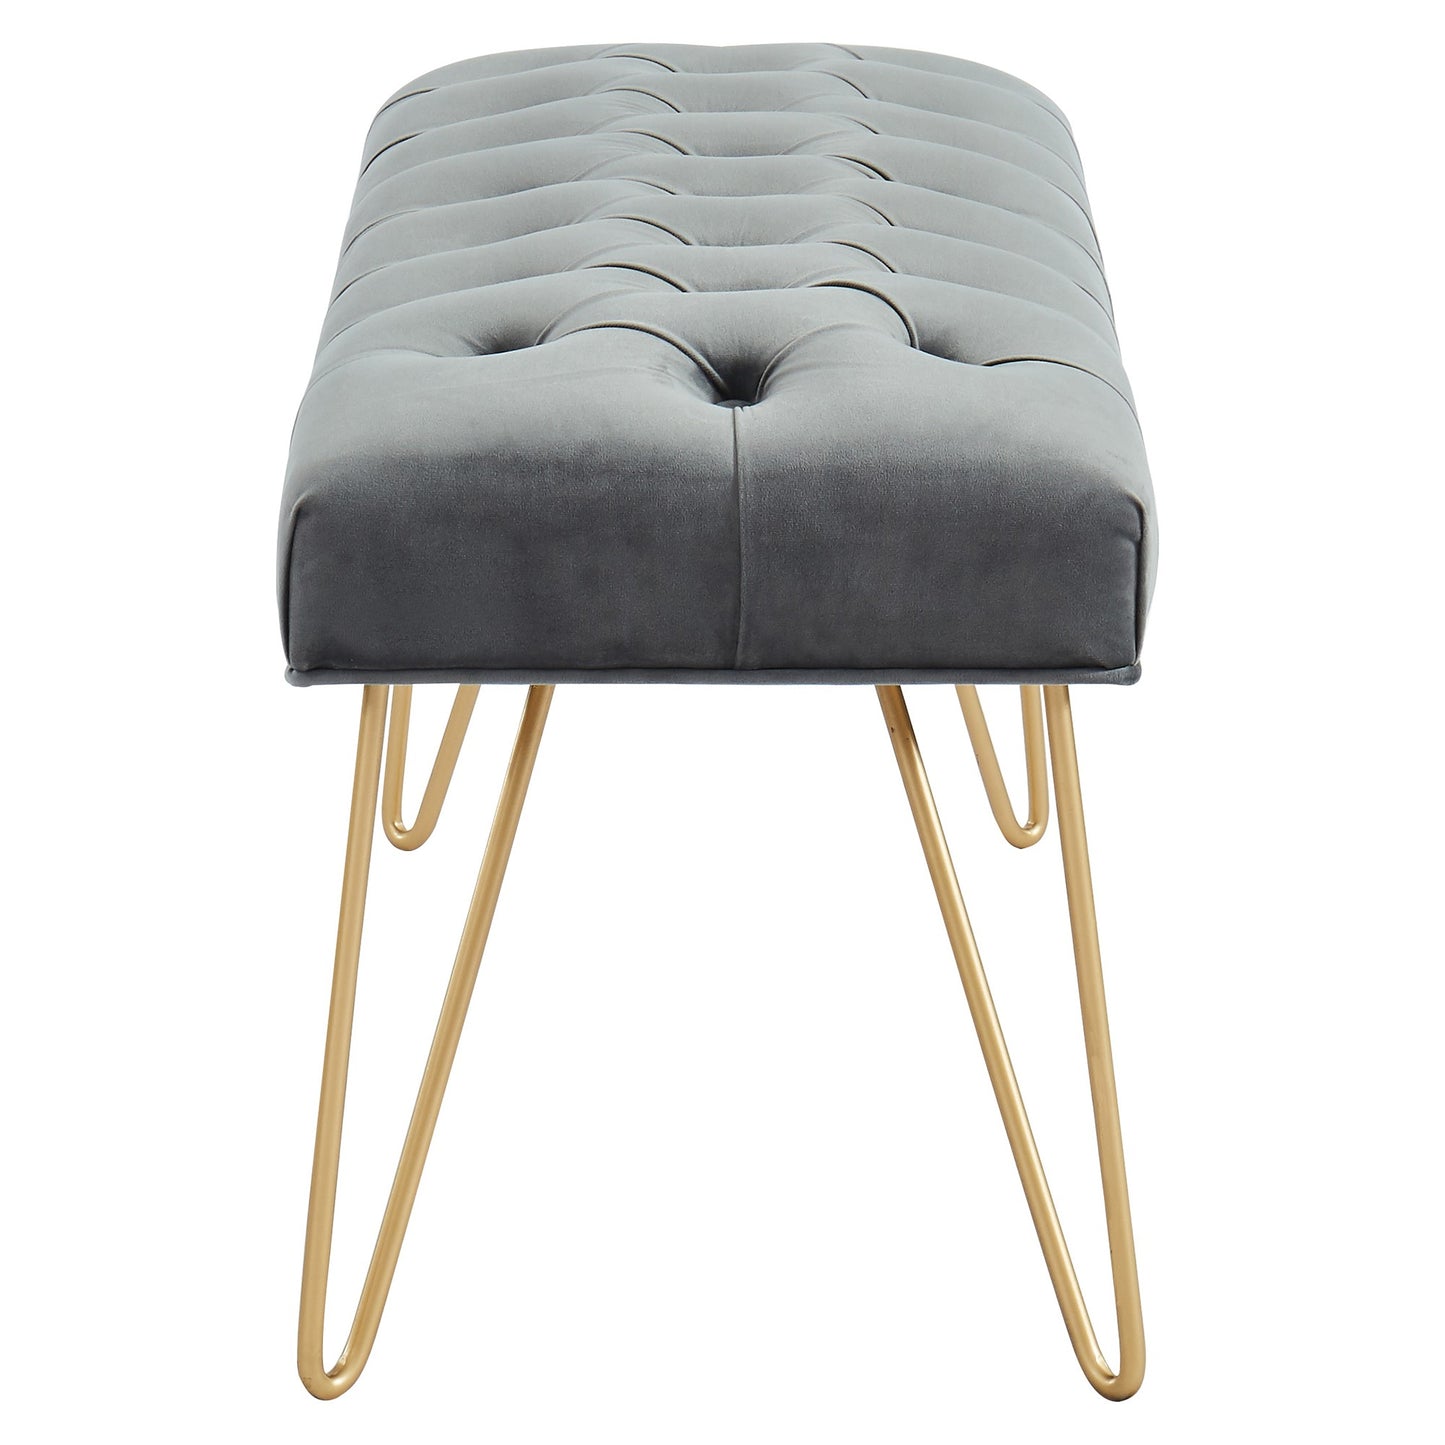 Vdara Double Bench in Grey/Gold